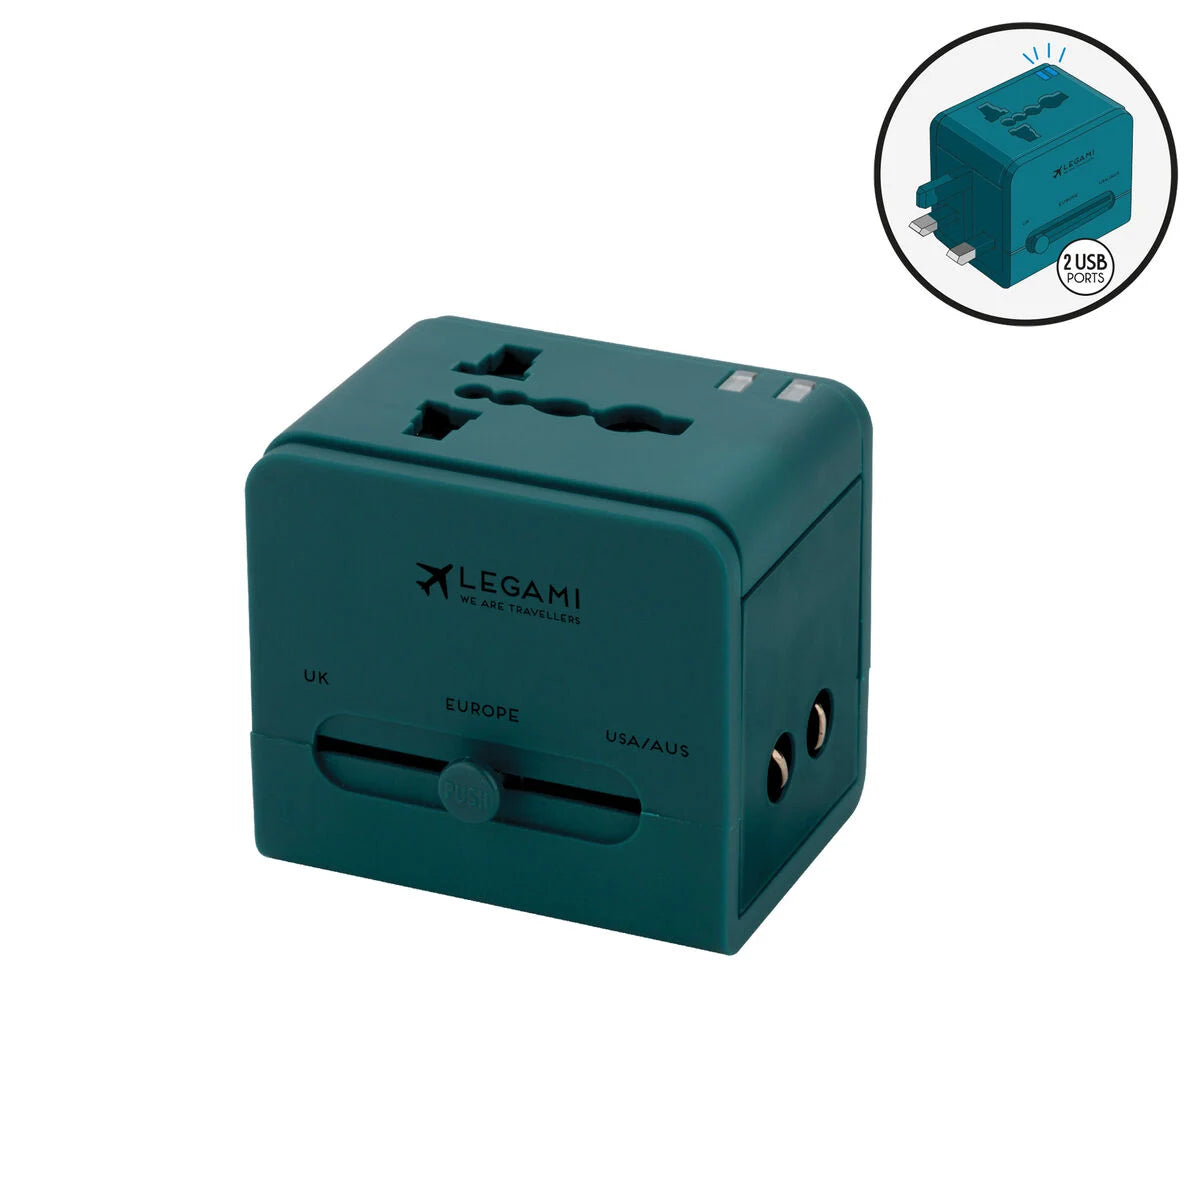 Fab Gifts  Legami Universal Travel Adapter Blue by Weirs of Baggot St